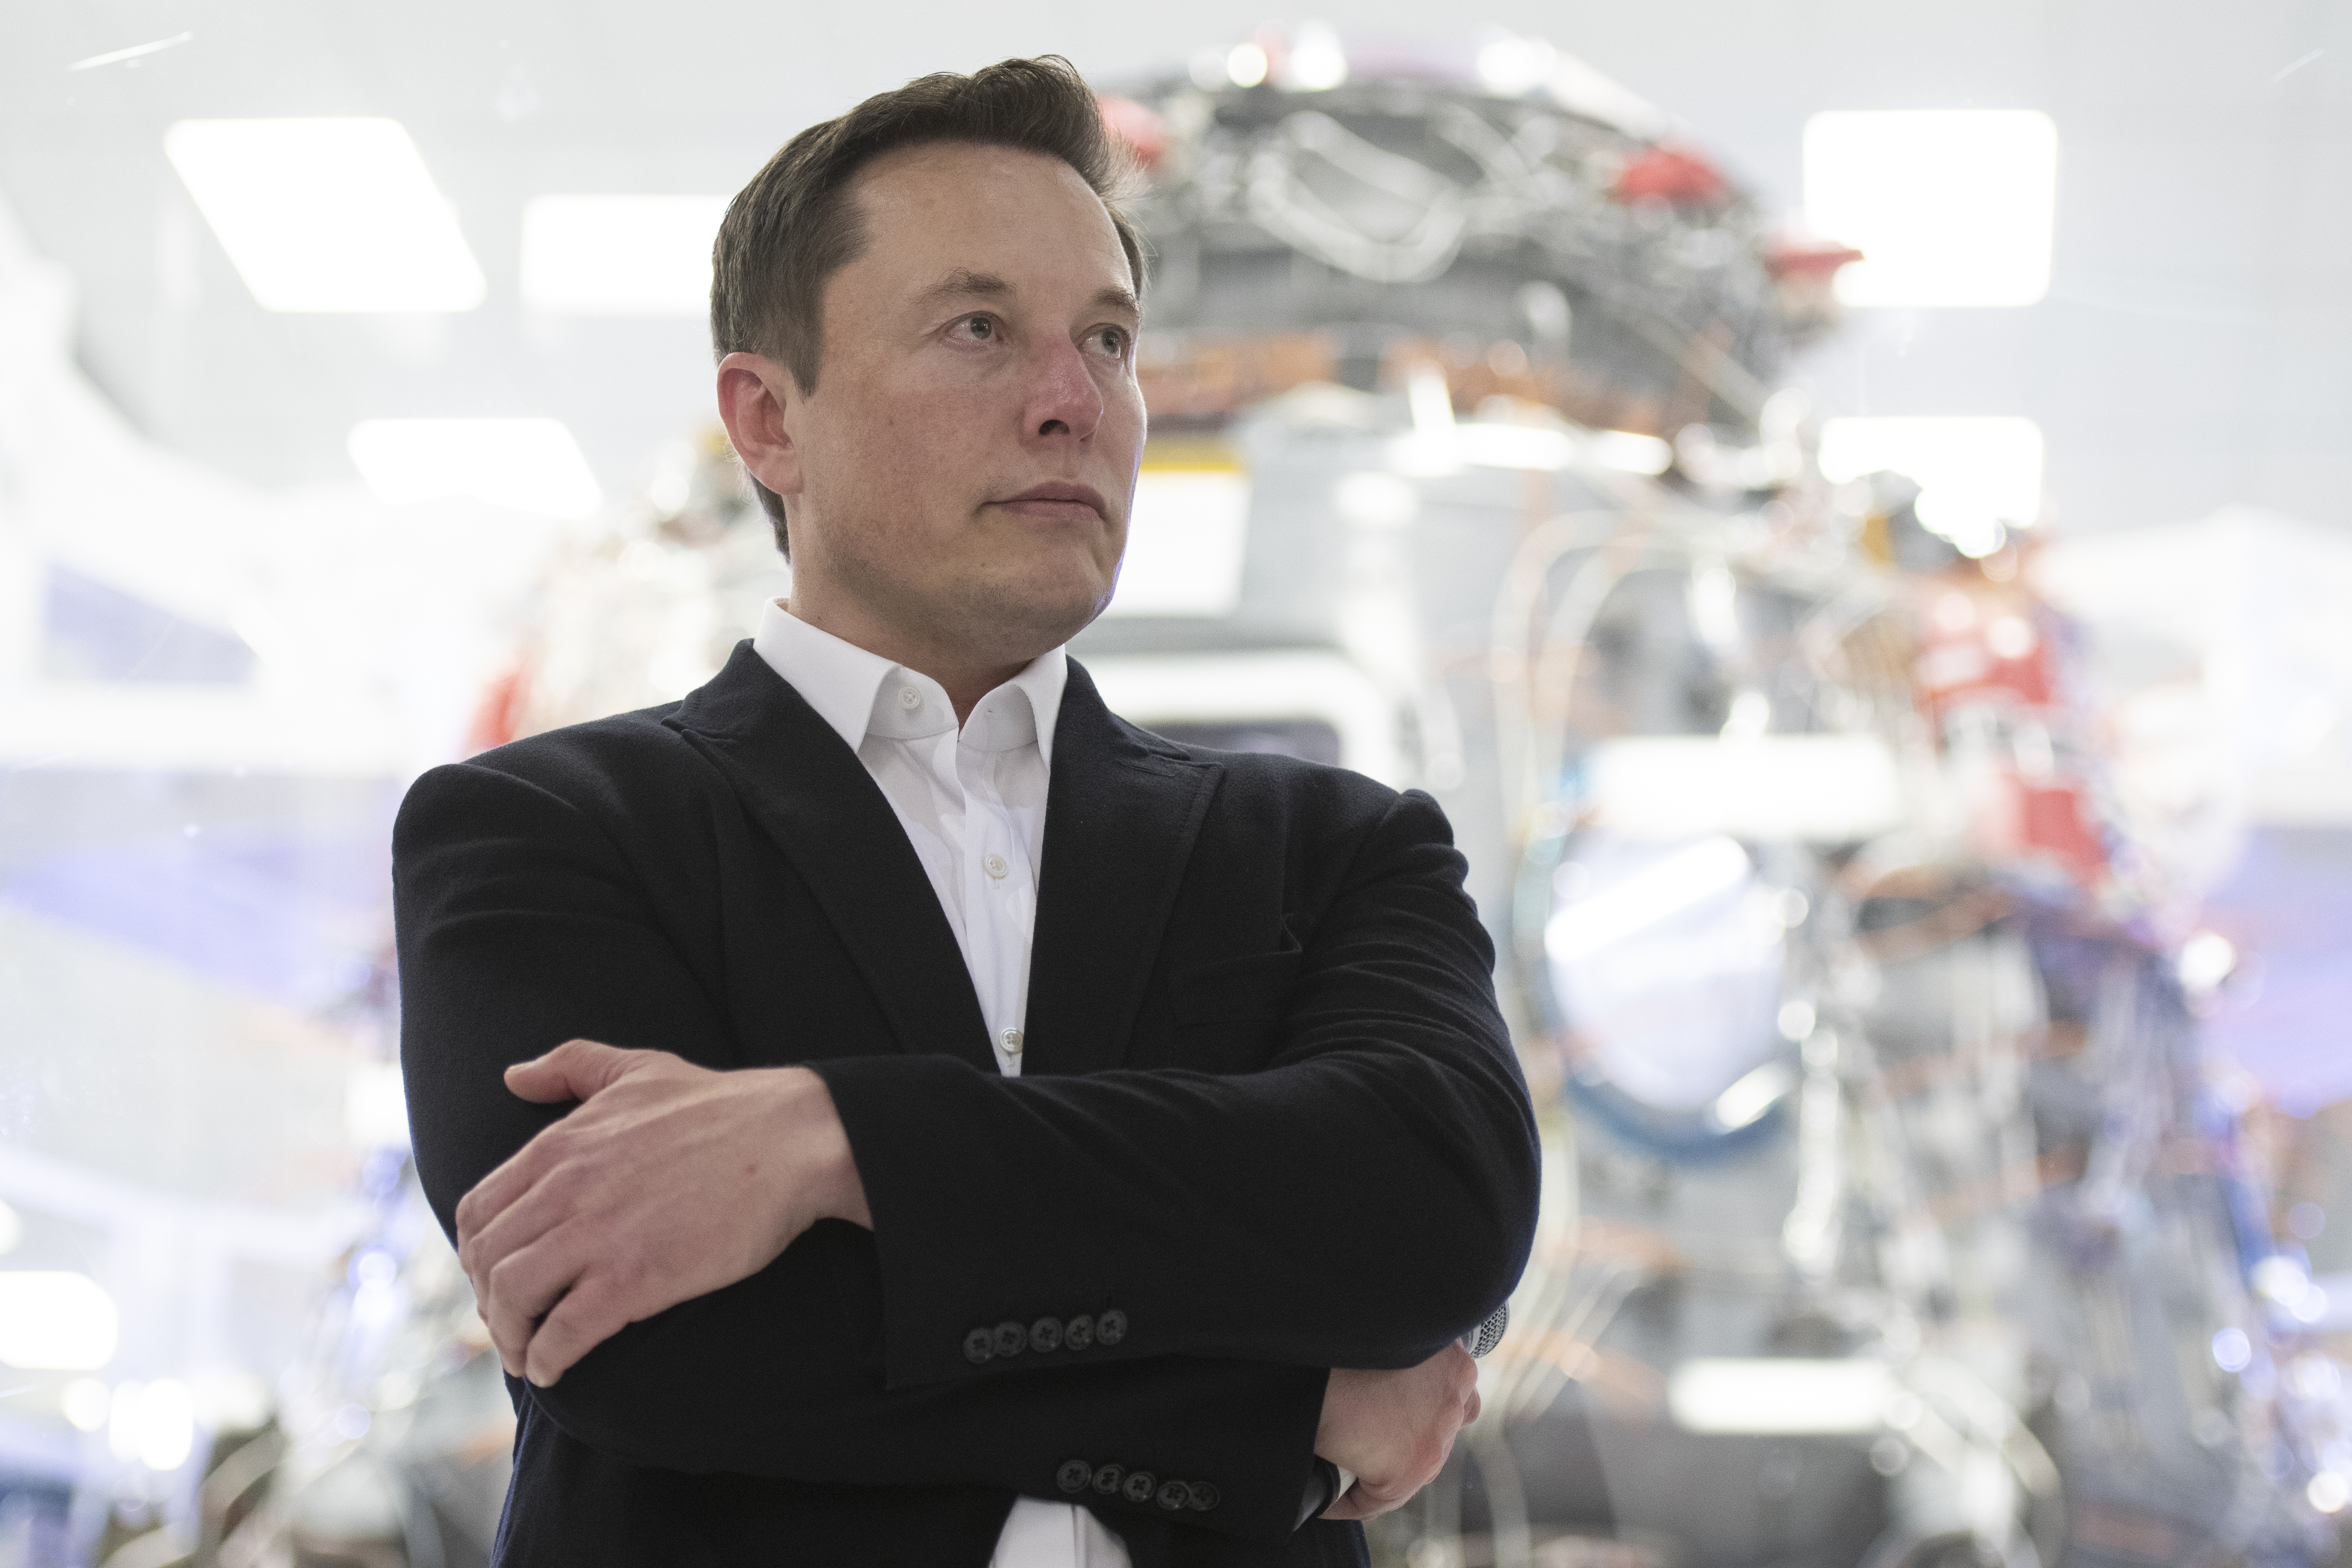 Wondering about getting a job at SpaceX? Elon Musk says innovation is the main criterion